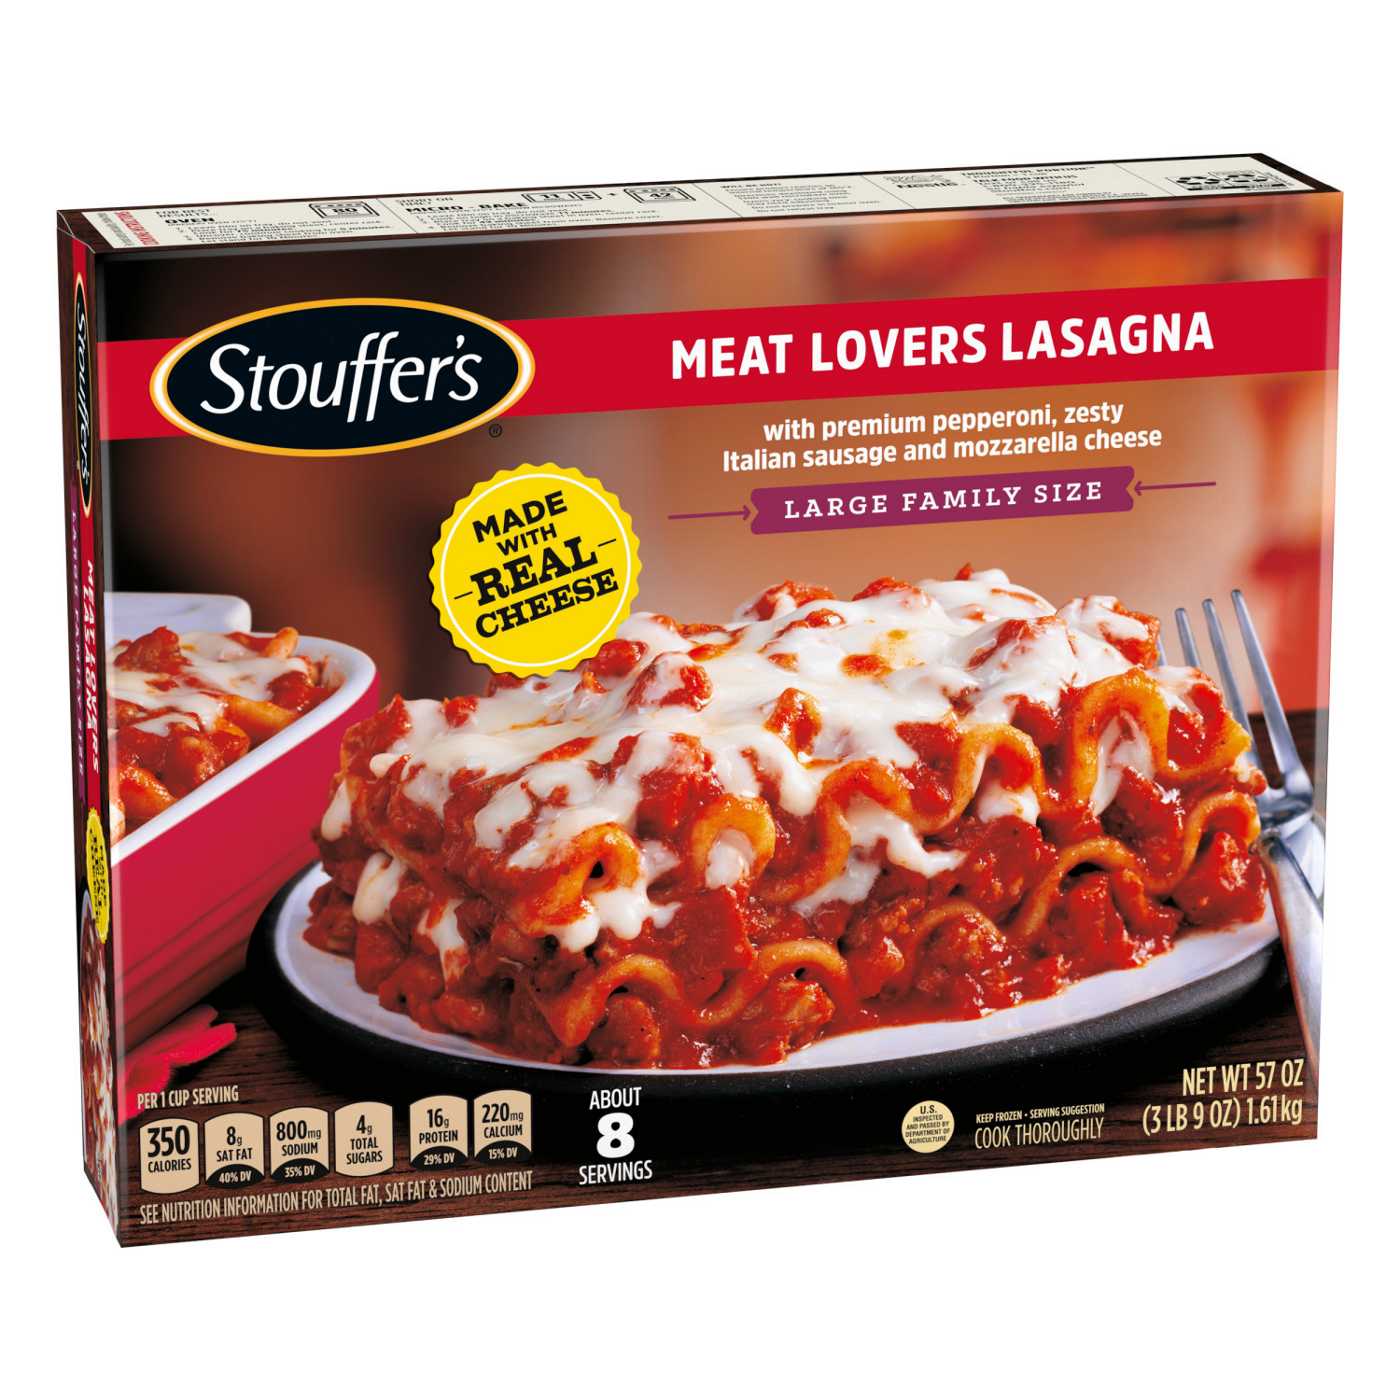 Stouffer's Frozen Meat Lovers Lasagna - Large Family Size; image 2 of 5